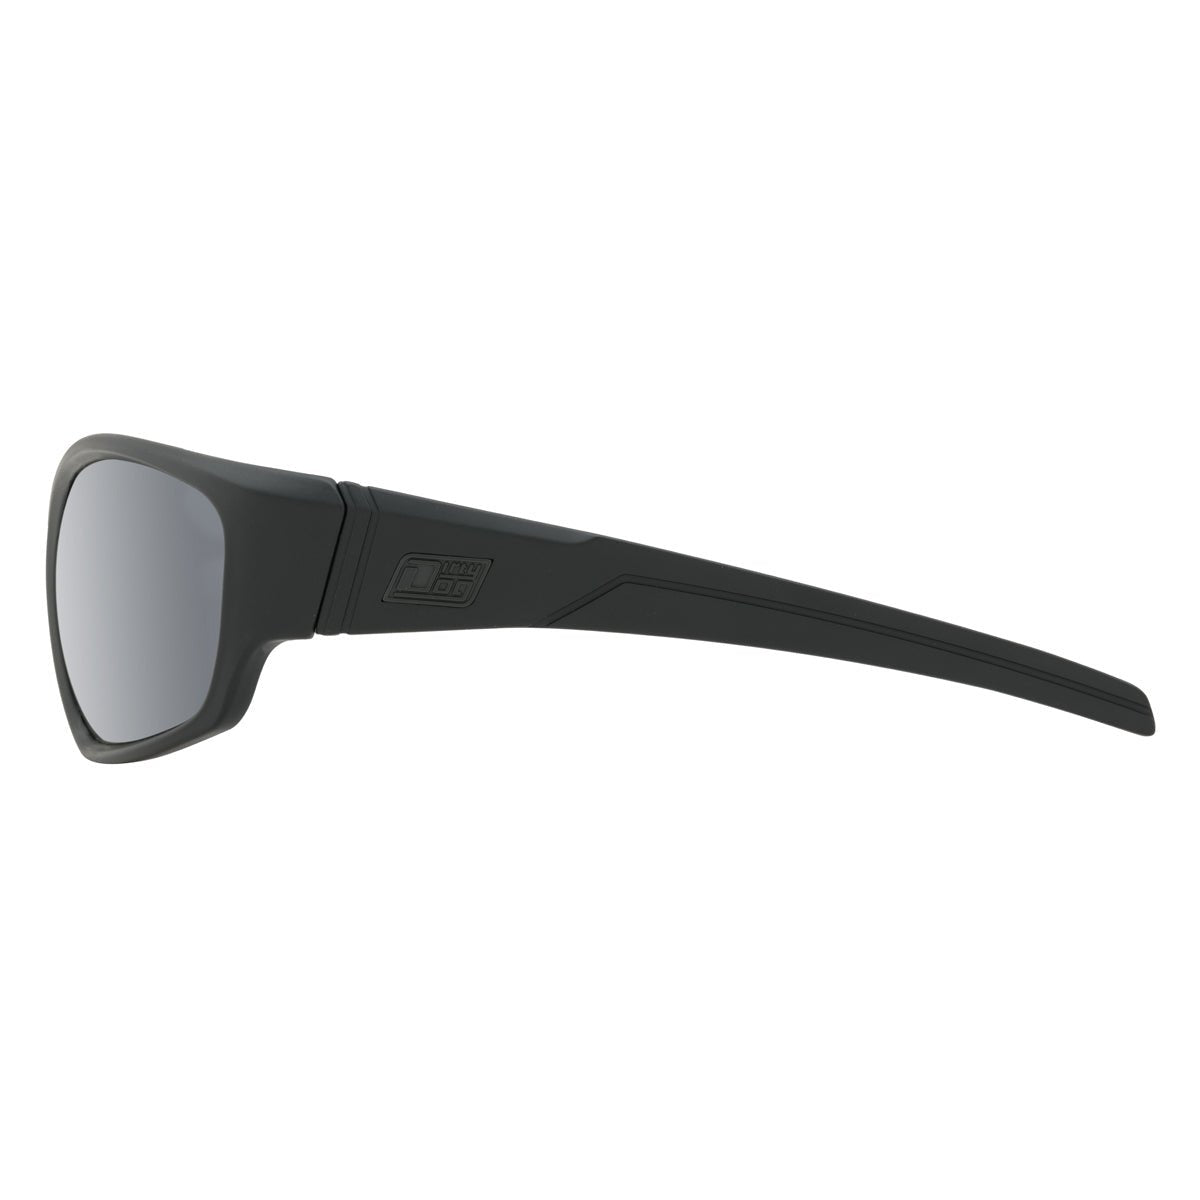 Dirty Dog Snapper Sunglasses - Worthing Watersports - 53766 - Sunglasses - Dirty Dog